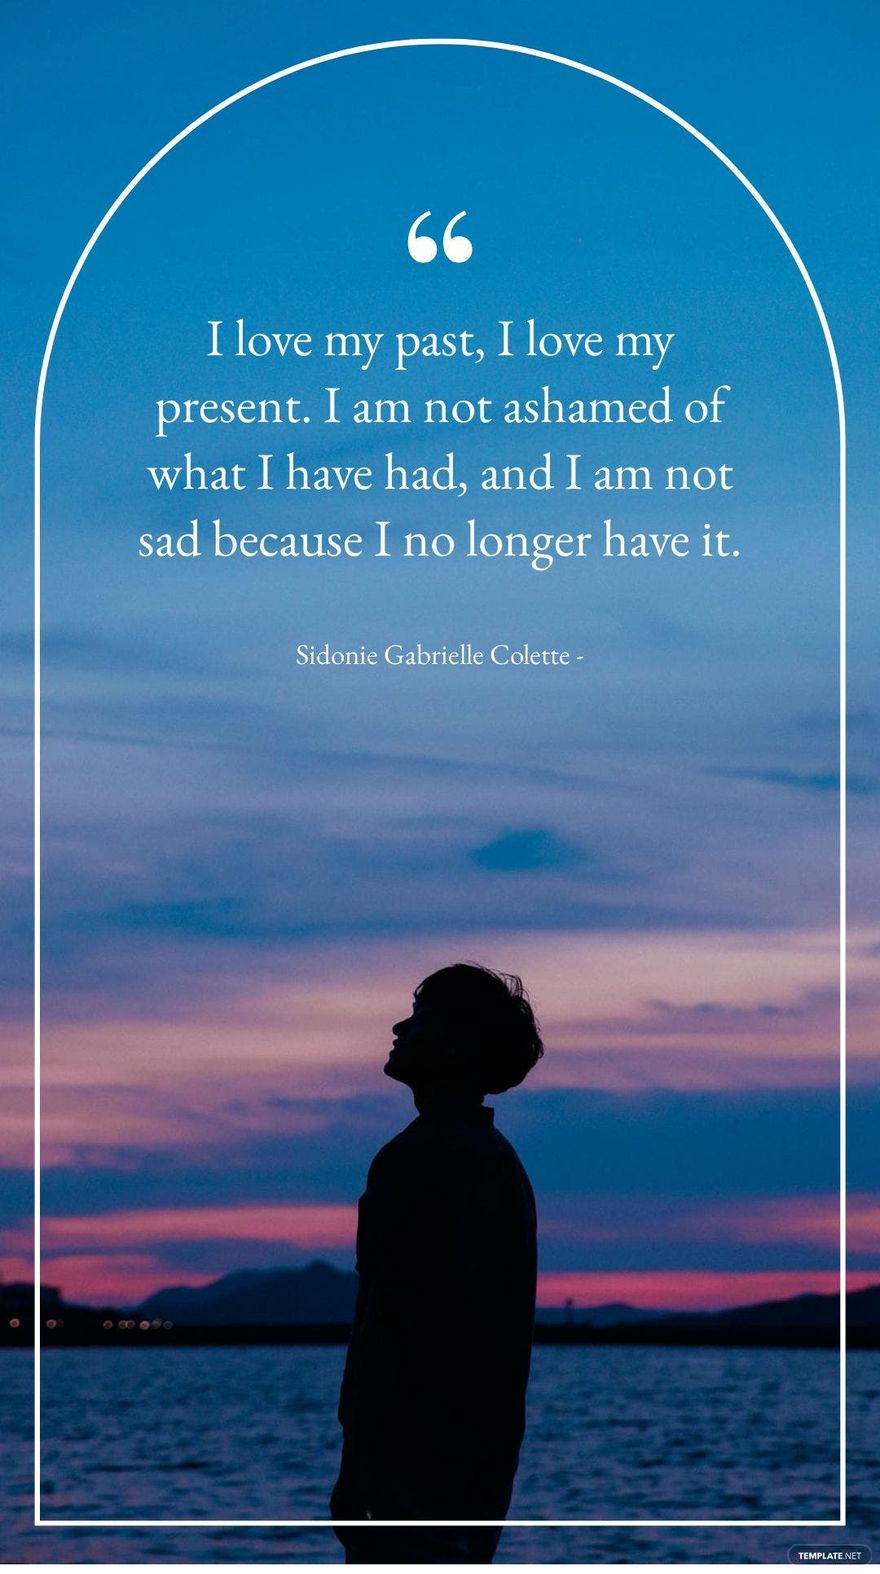 Sidonie Gabrielle Colette - I love my past, I love my present. I am not ashamed of what I have had, and I am not sad because I no longer have it.